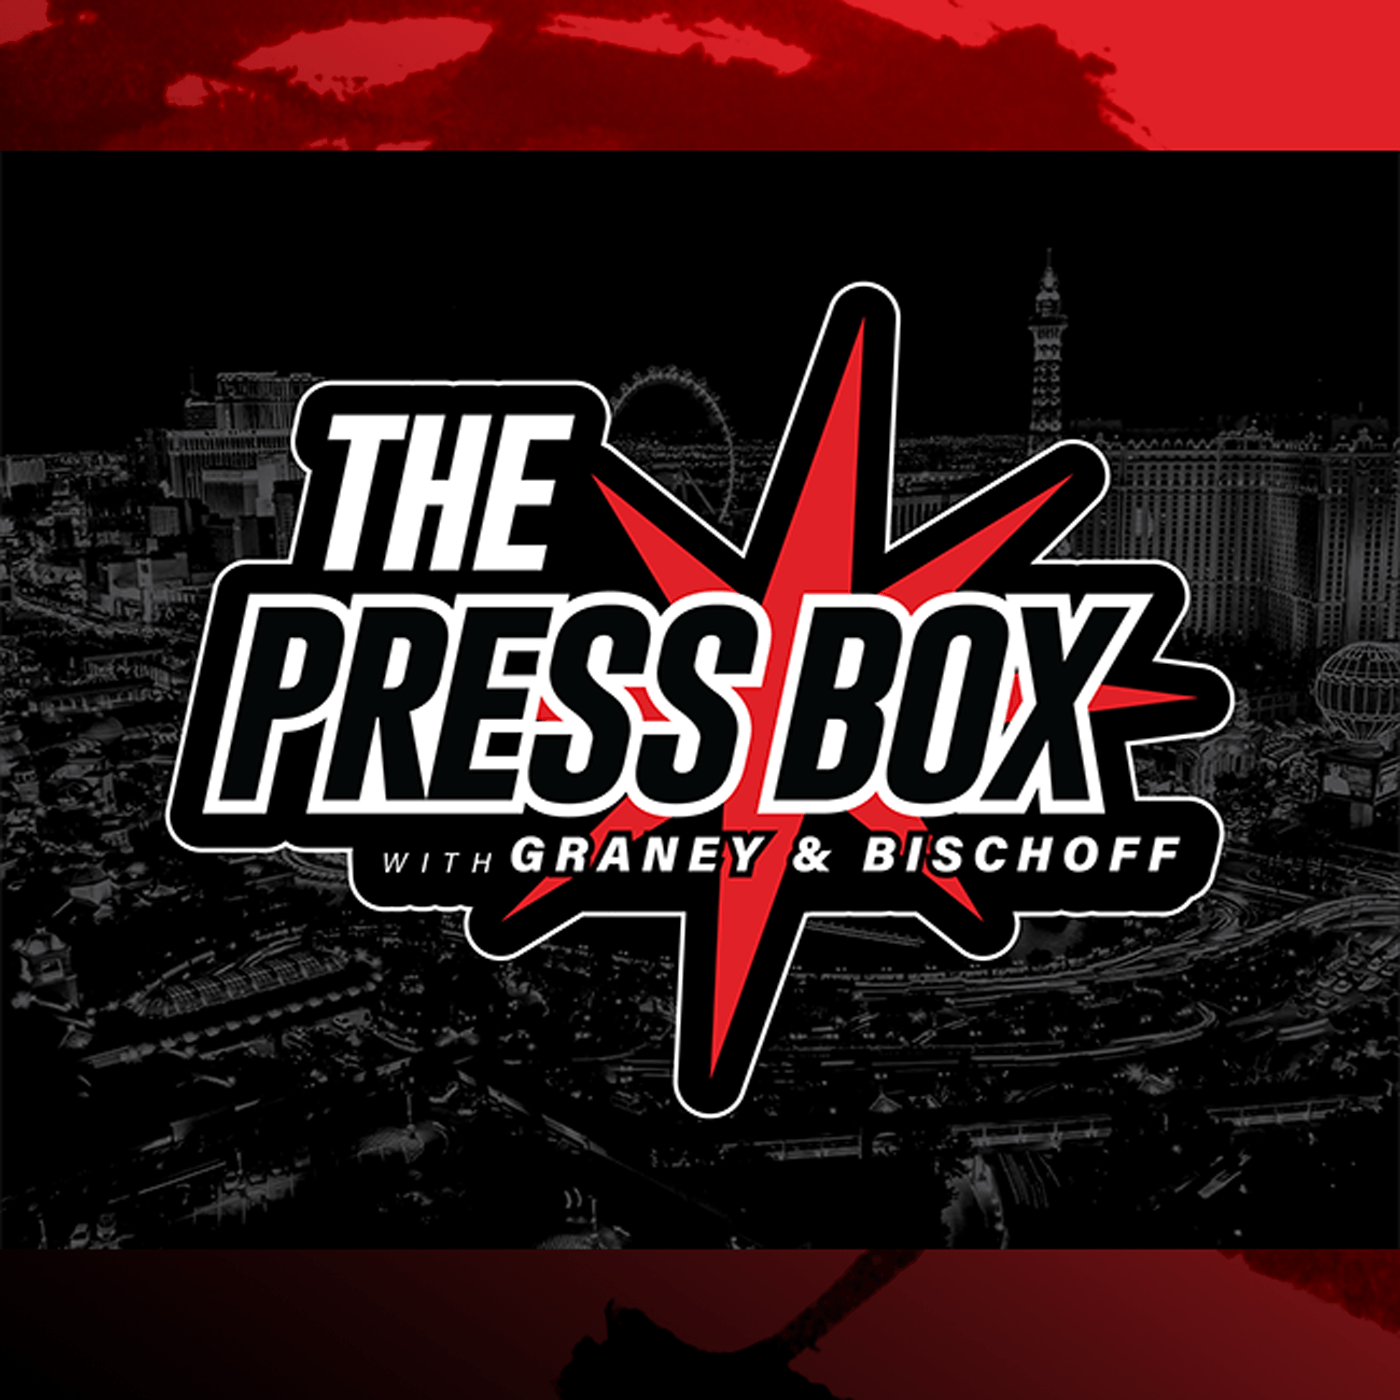 The Pressbox with Graney and Bischoff